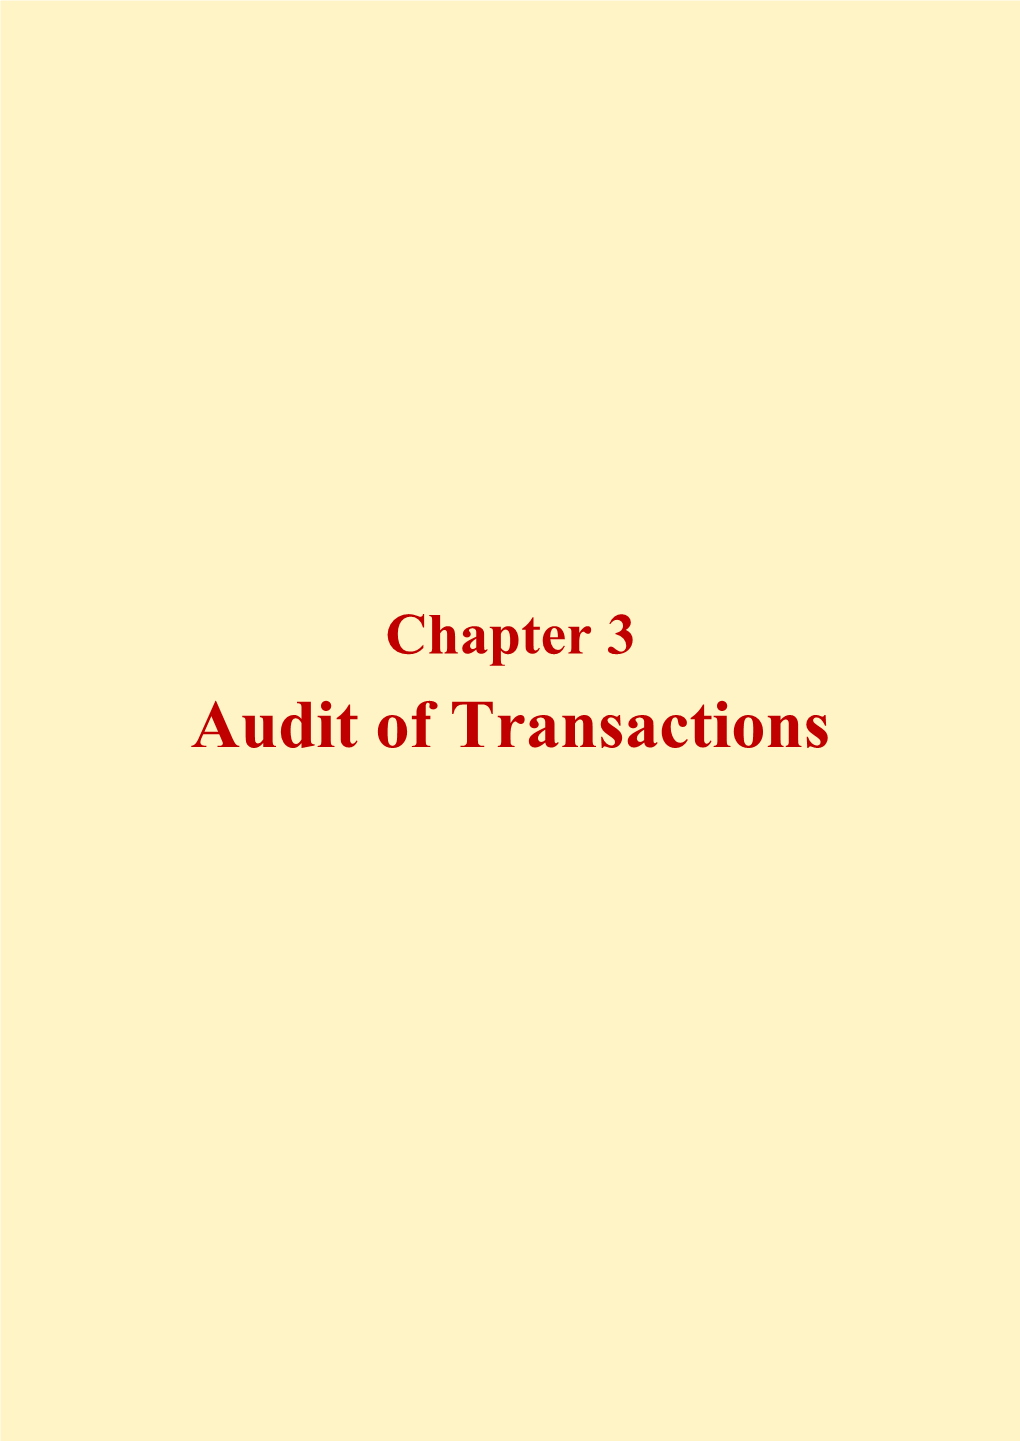 Audit of Transactions